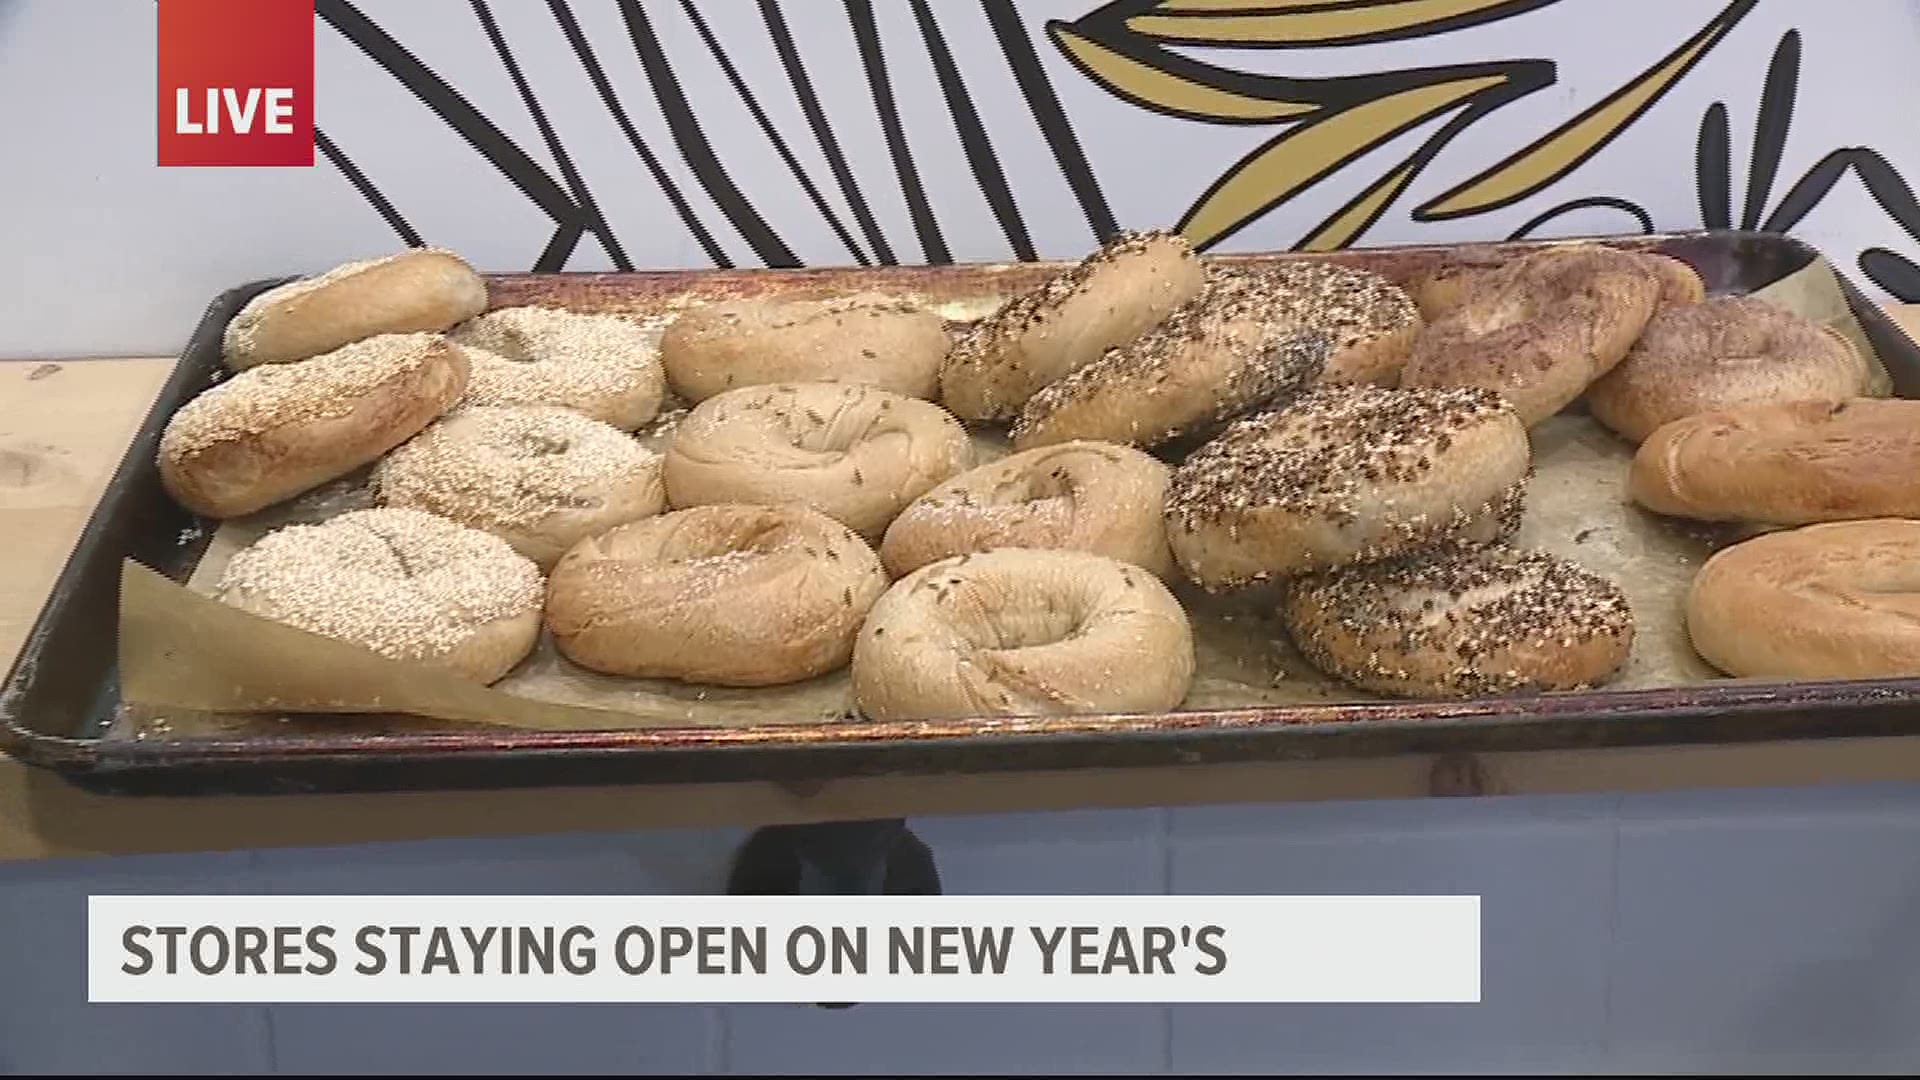 Many stores are closed to customers on New Year's Day, but Harvest Moon Bakery in Lancaster is open and ready for customers!